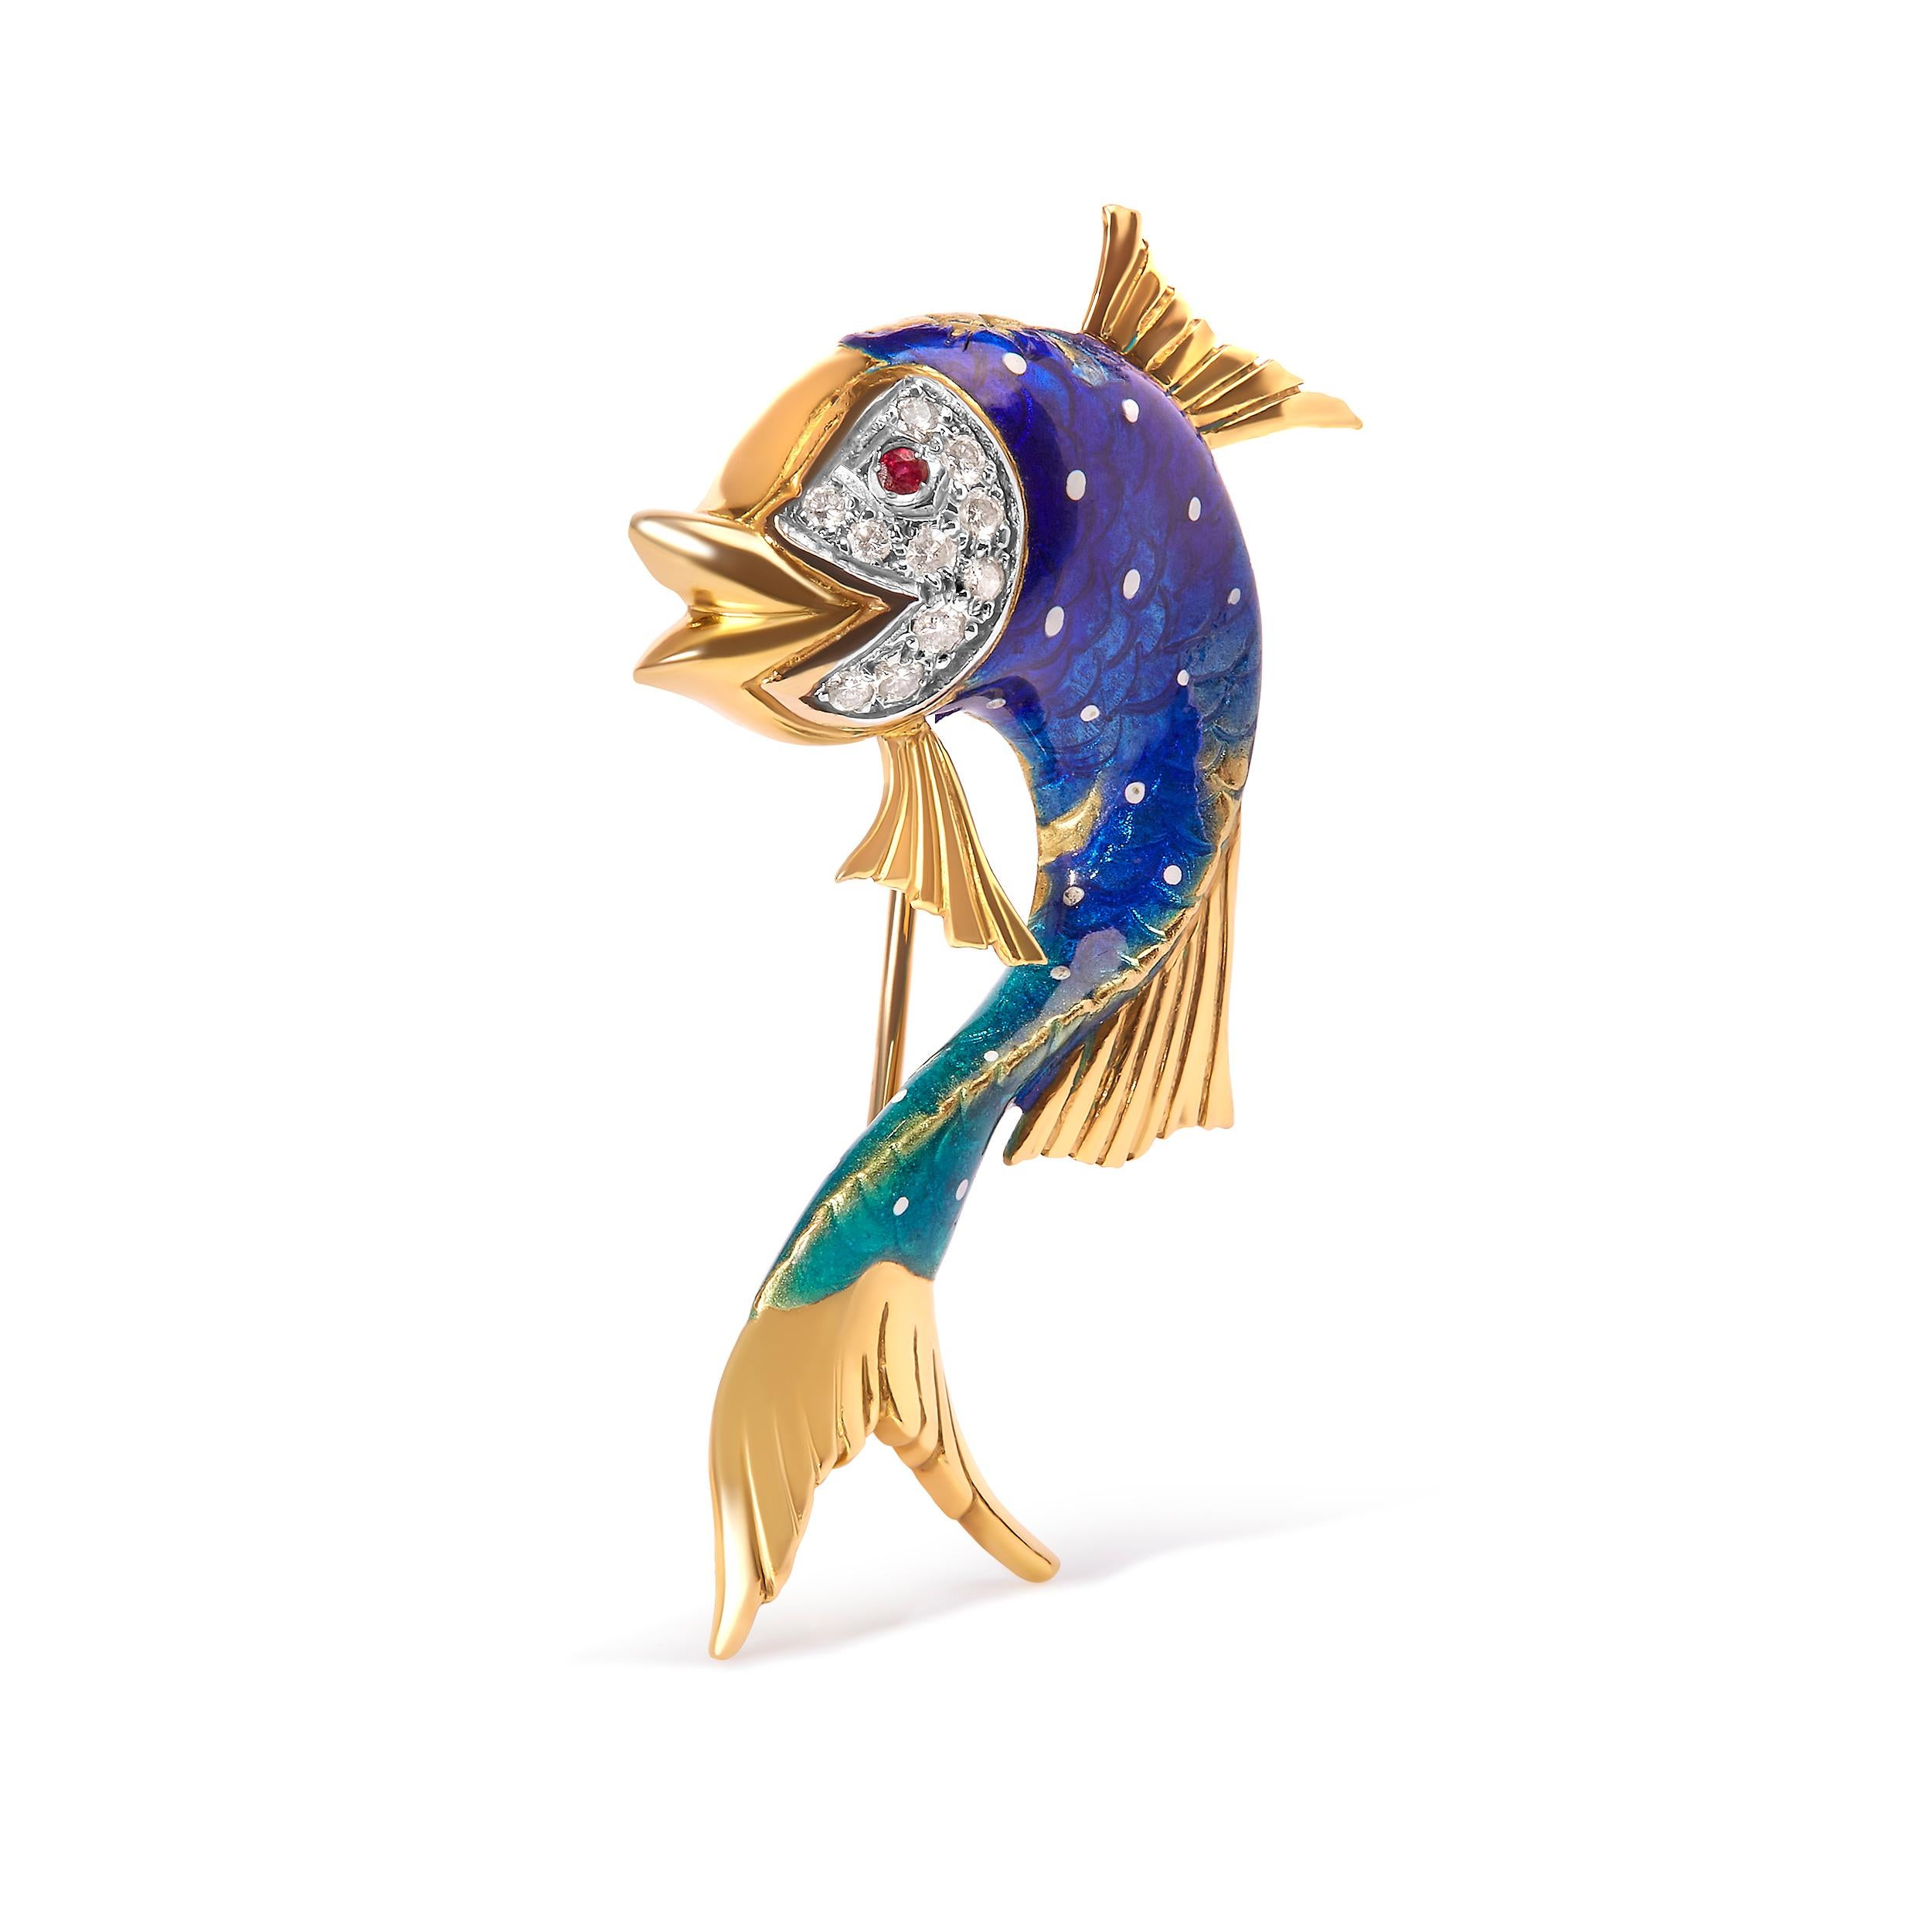 Introducing a mesmerizing masterpiece that captivates both women and men alike. This enchanting Fish Brooch Pin, crafted in 18K Yellow Gold and adorned with Blue Enamel, is a true symbol of elegance and grace. Its shimmering allure is further